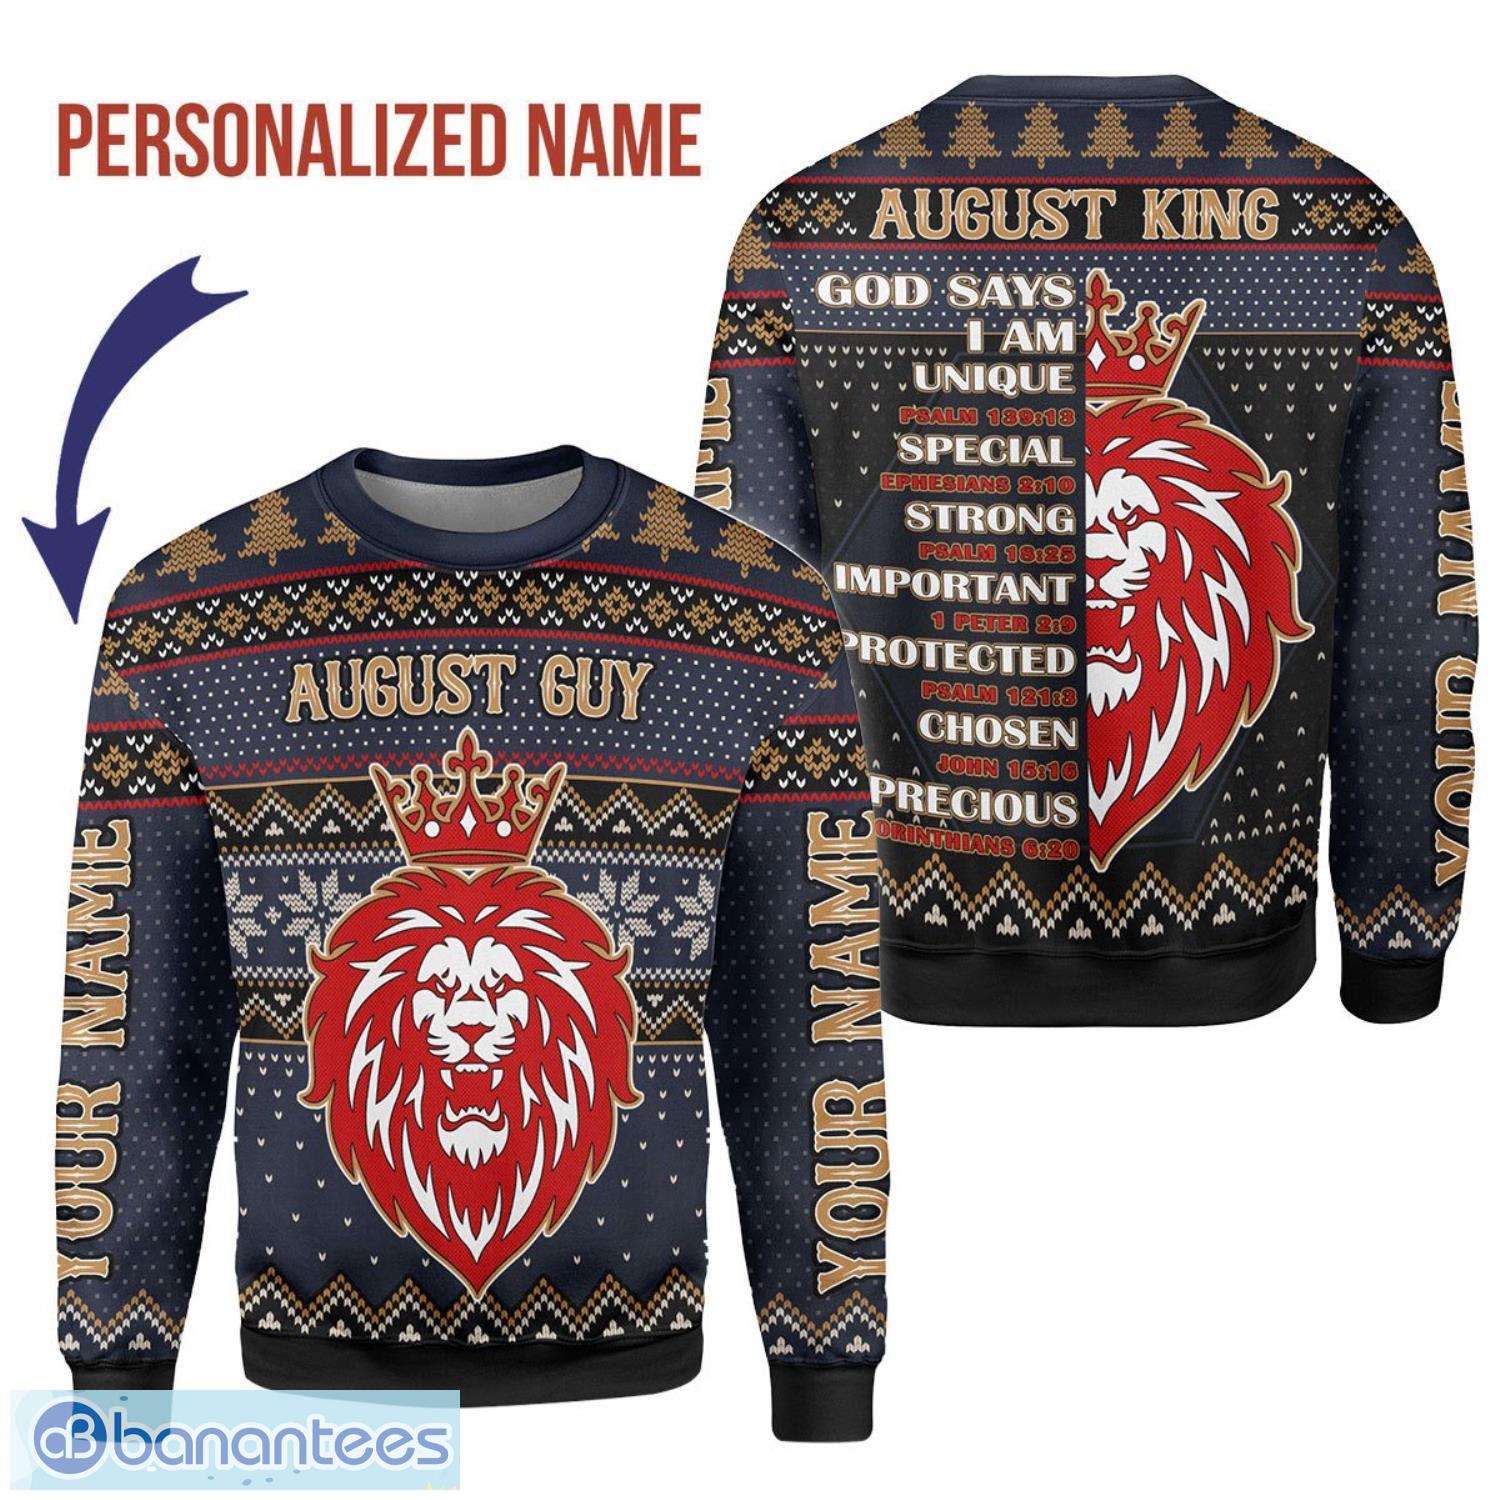 Personalized Name August Guy God Says I Am Unique 3D Ugly Christmas Sweater Christmas Gift Product Photo 1